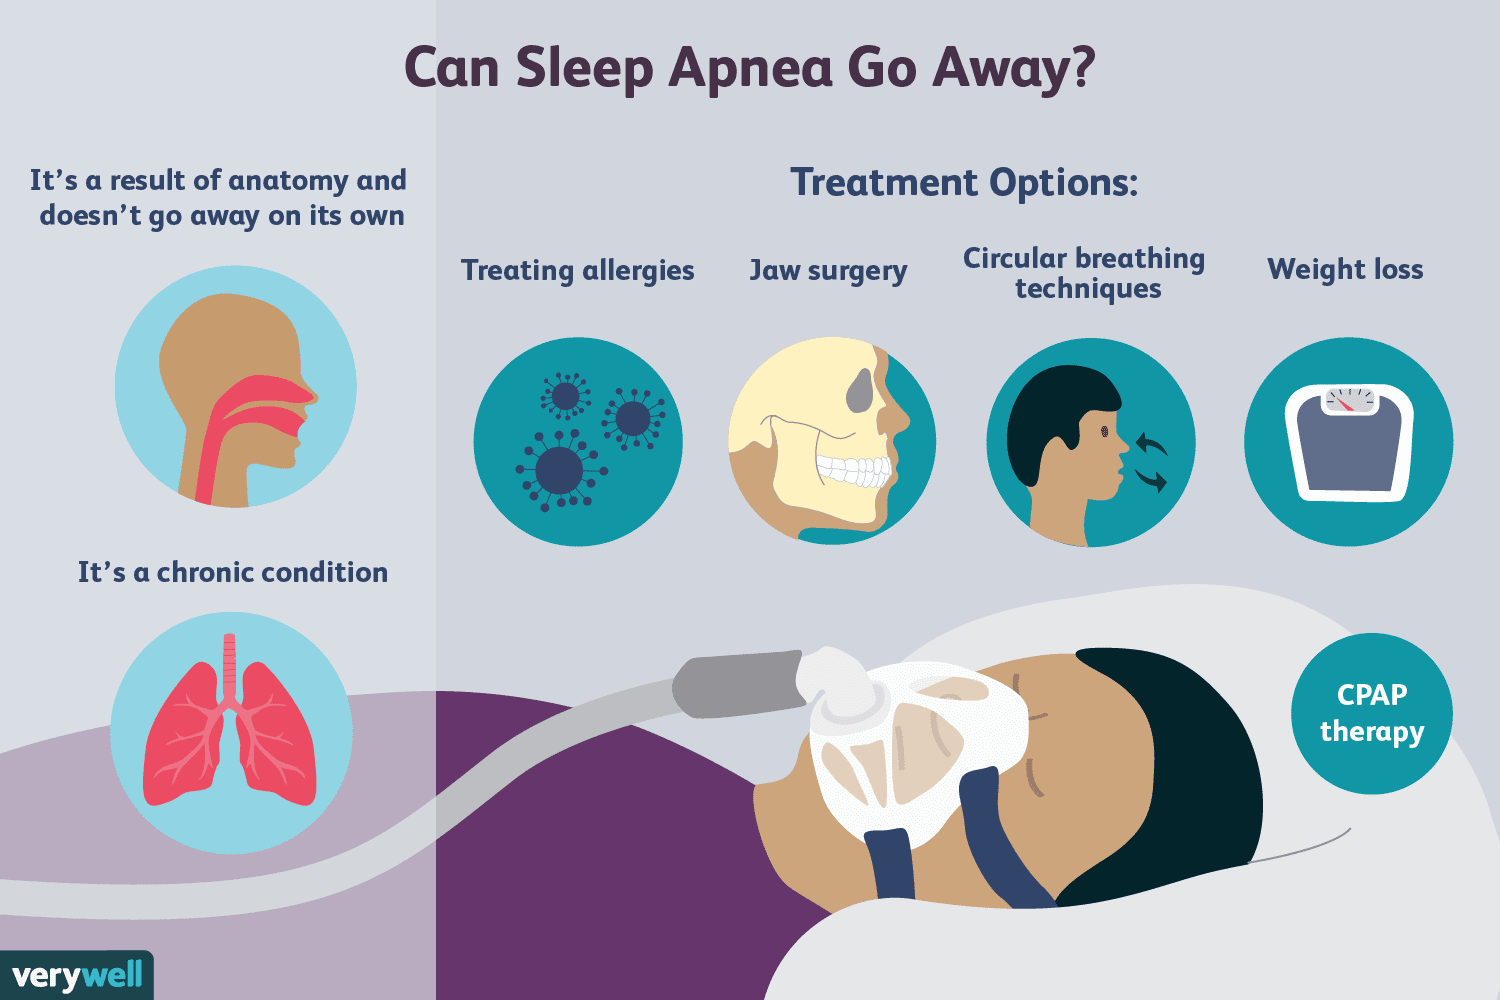 Can sleep apnea be cured by exercise?